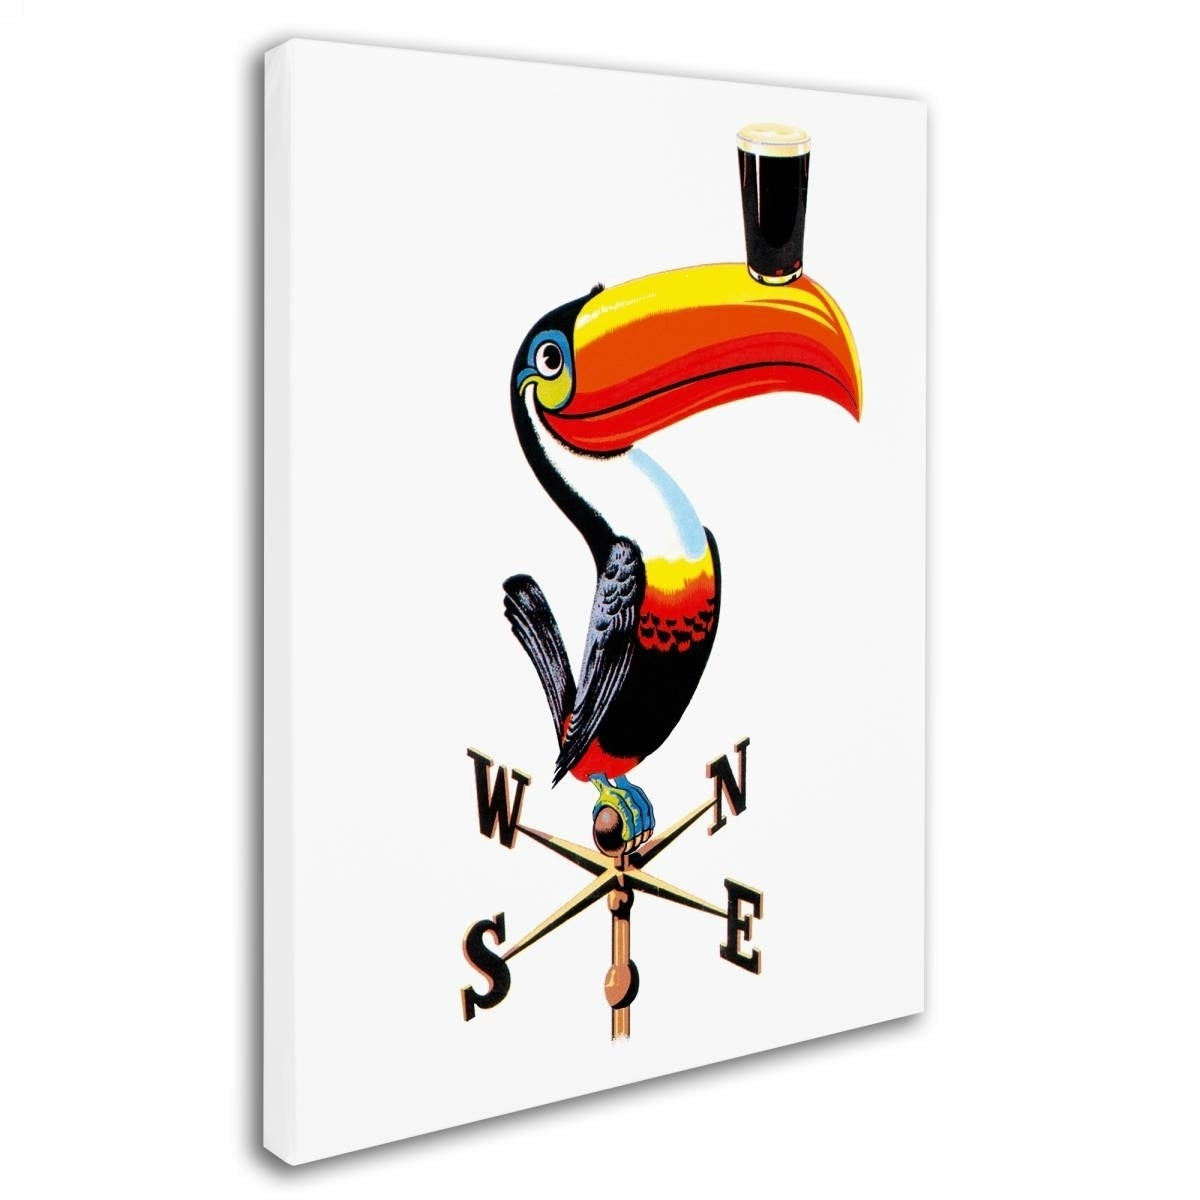 A Guinness toucan holding a glass of beer on a Guinness Brewery 'Guinness V' canvas art print.